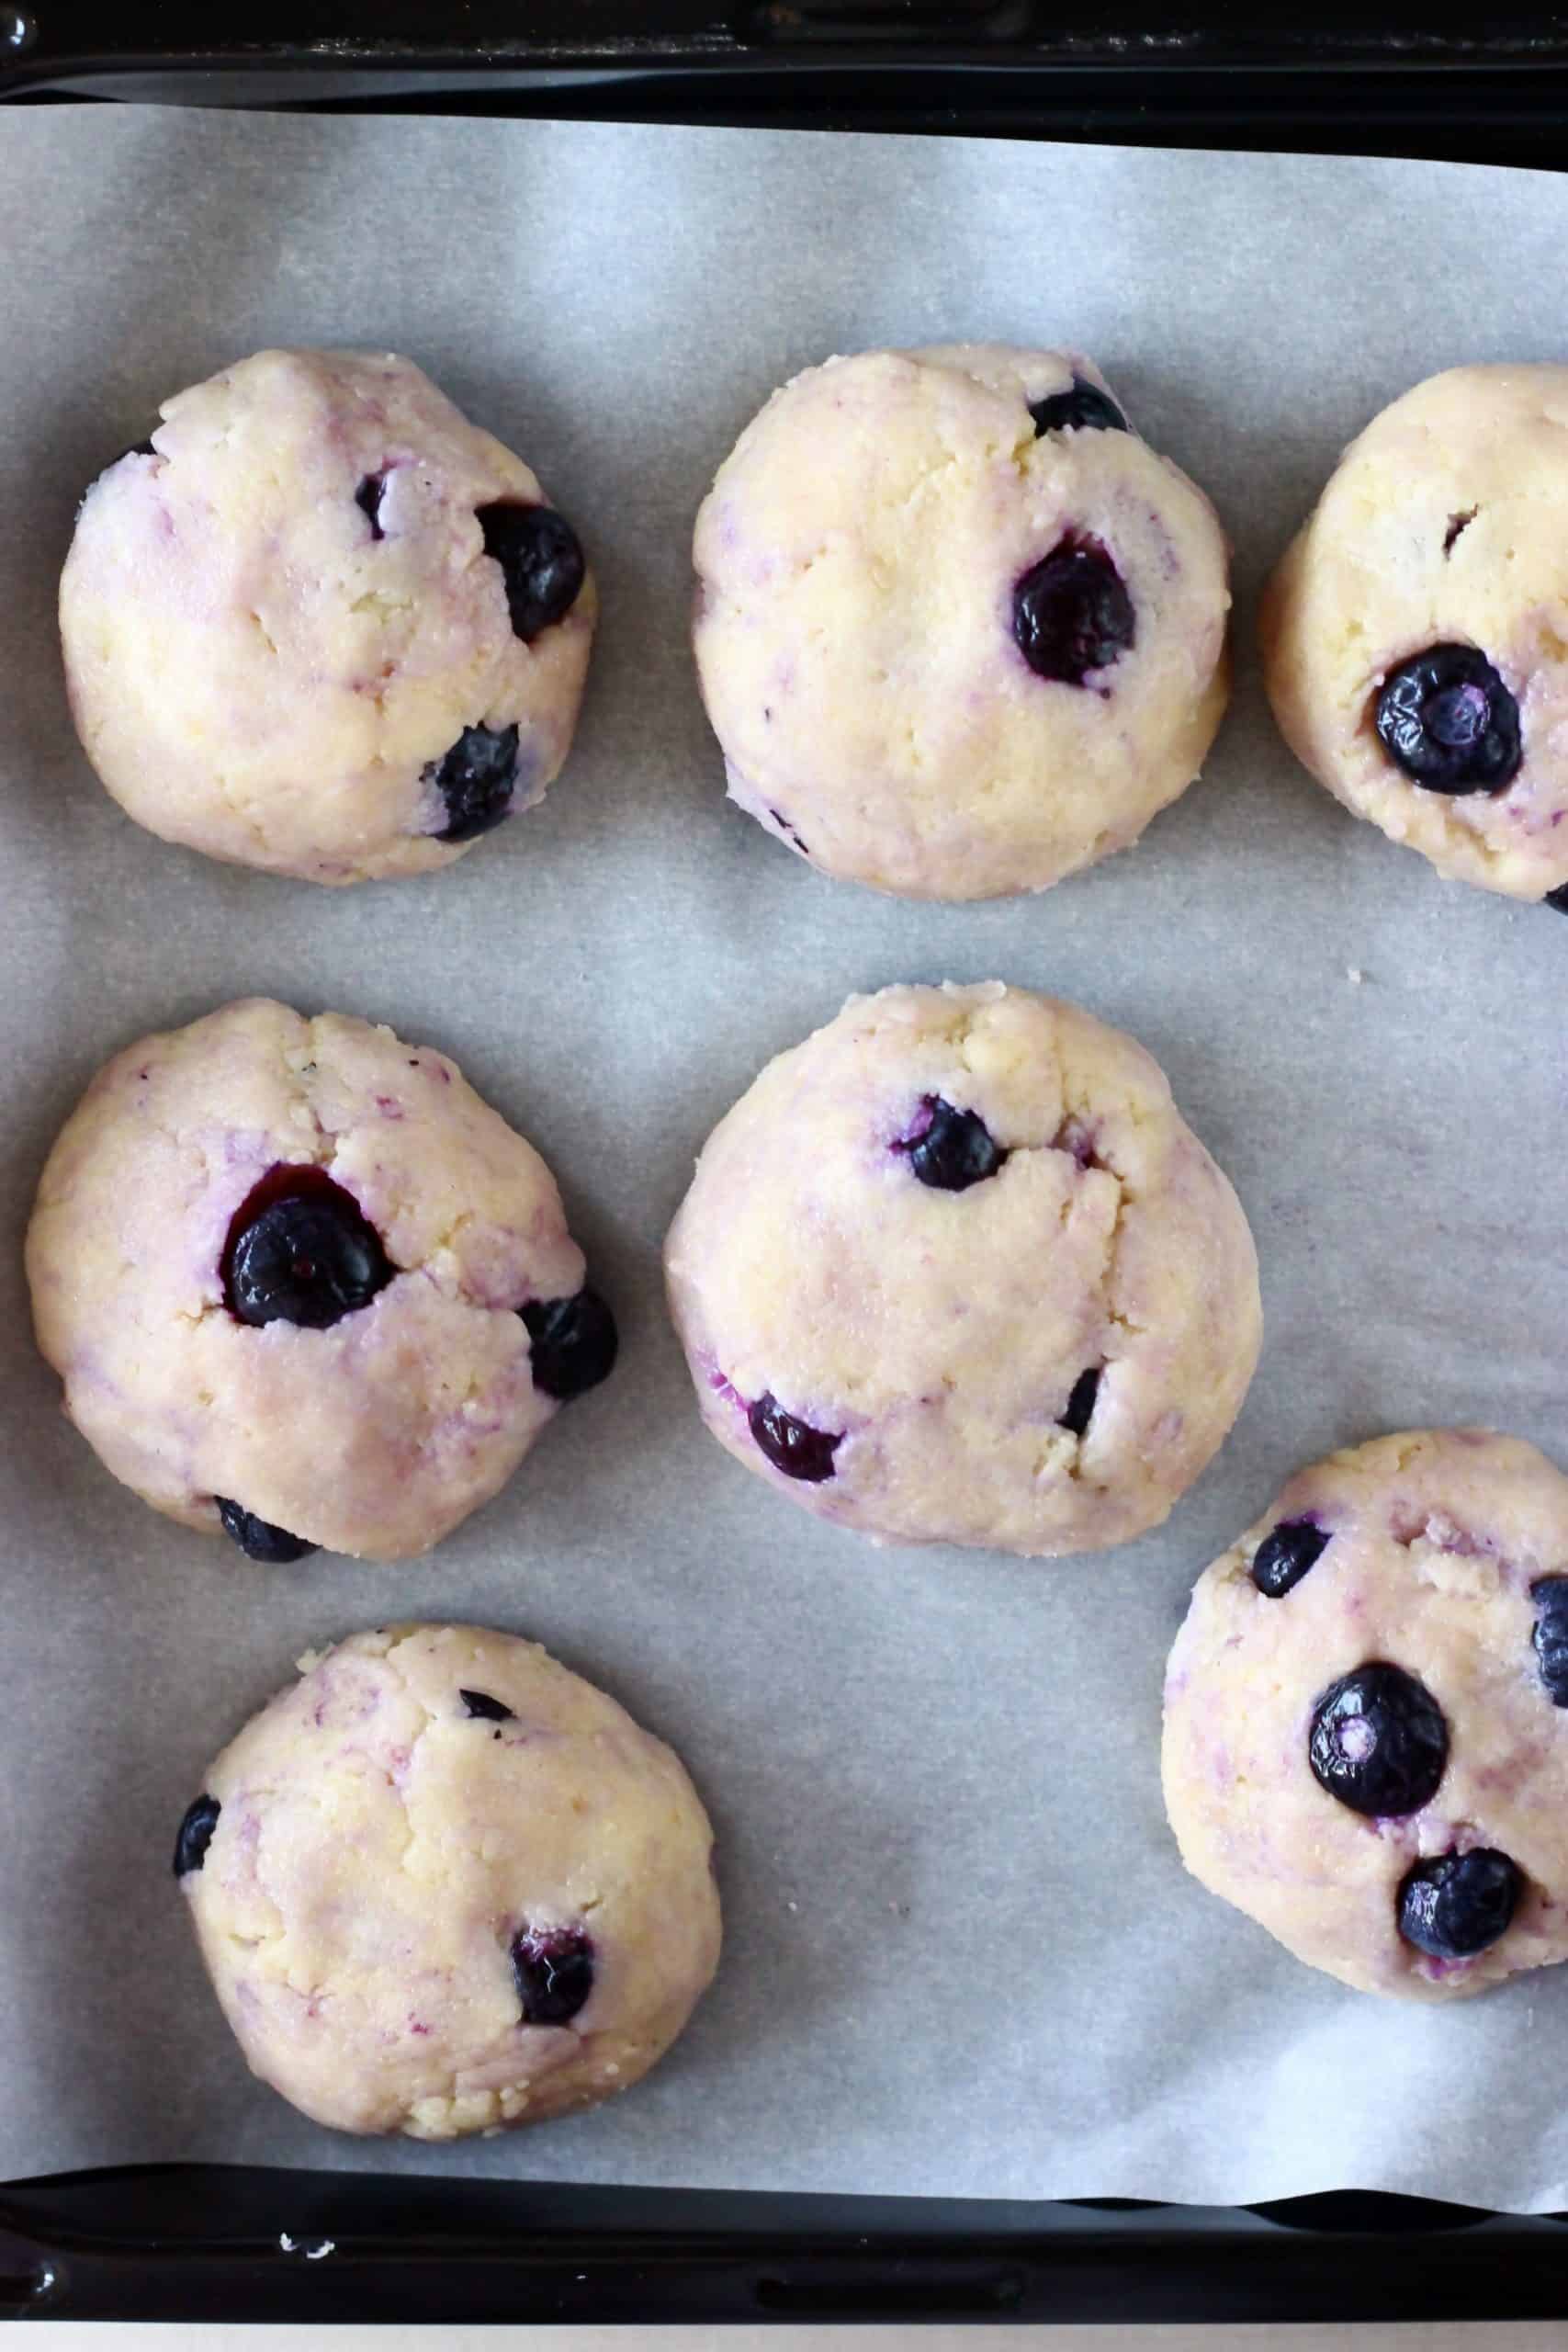 Seven raw gluten-free vegan lemon blueberry cookies on a baking tray lined with baking paper